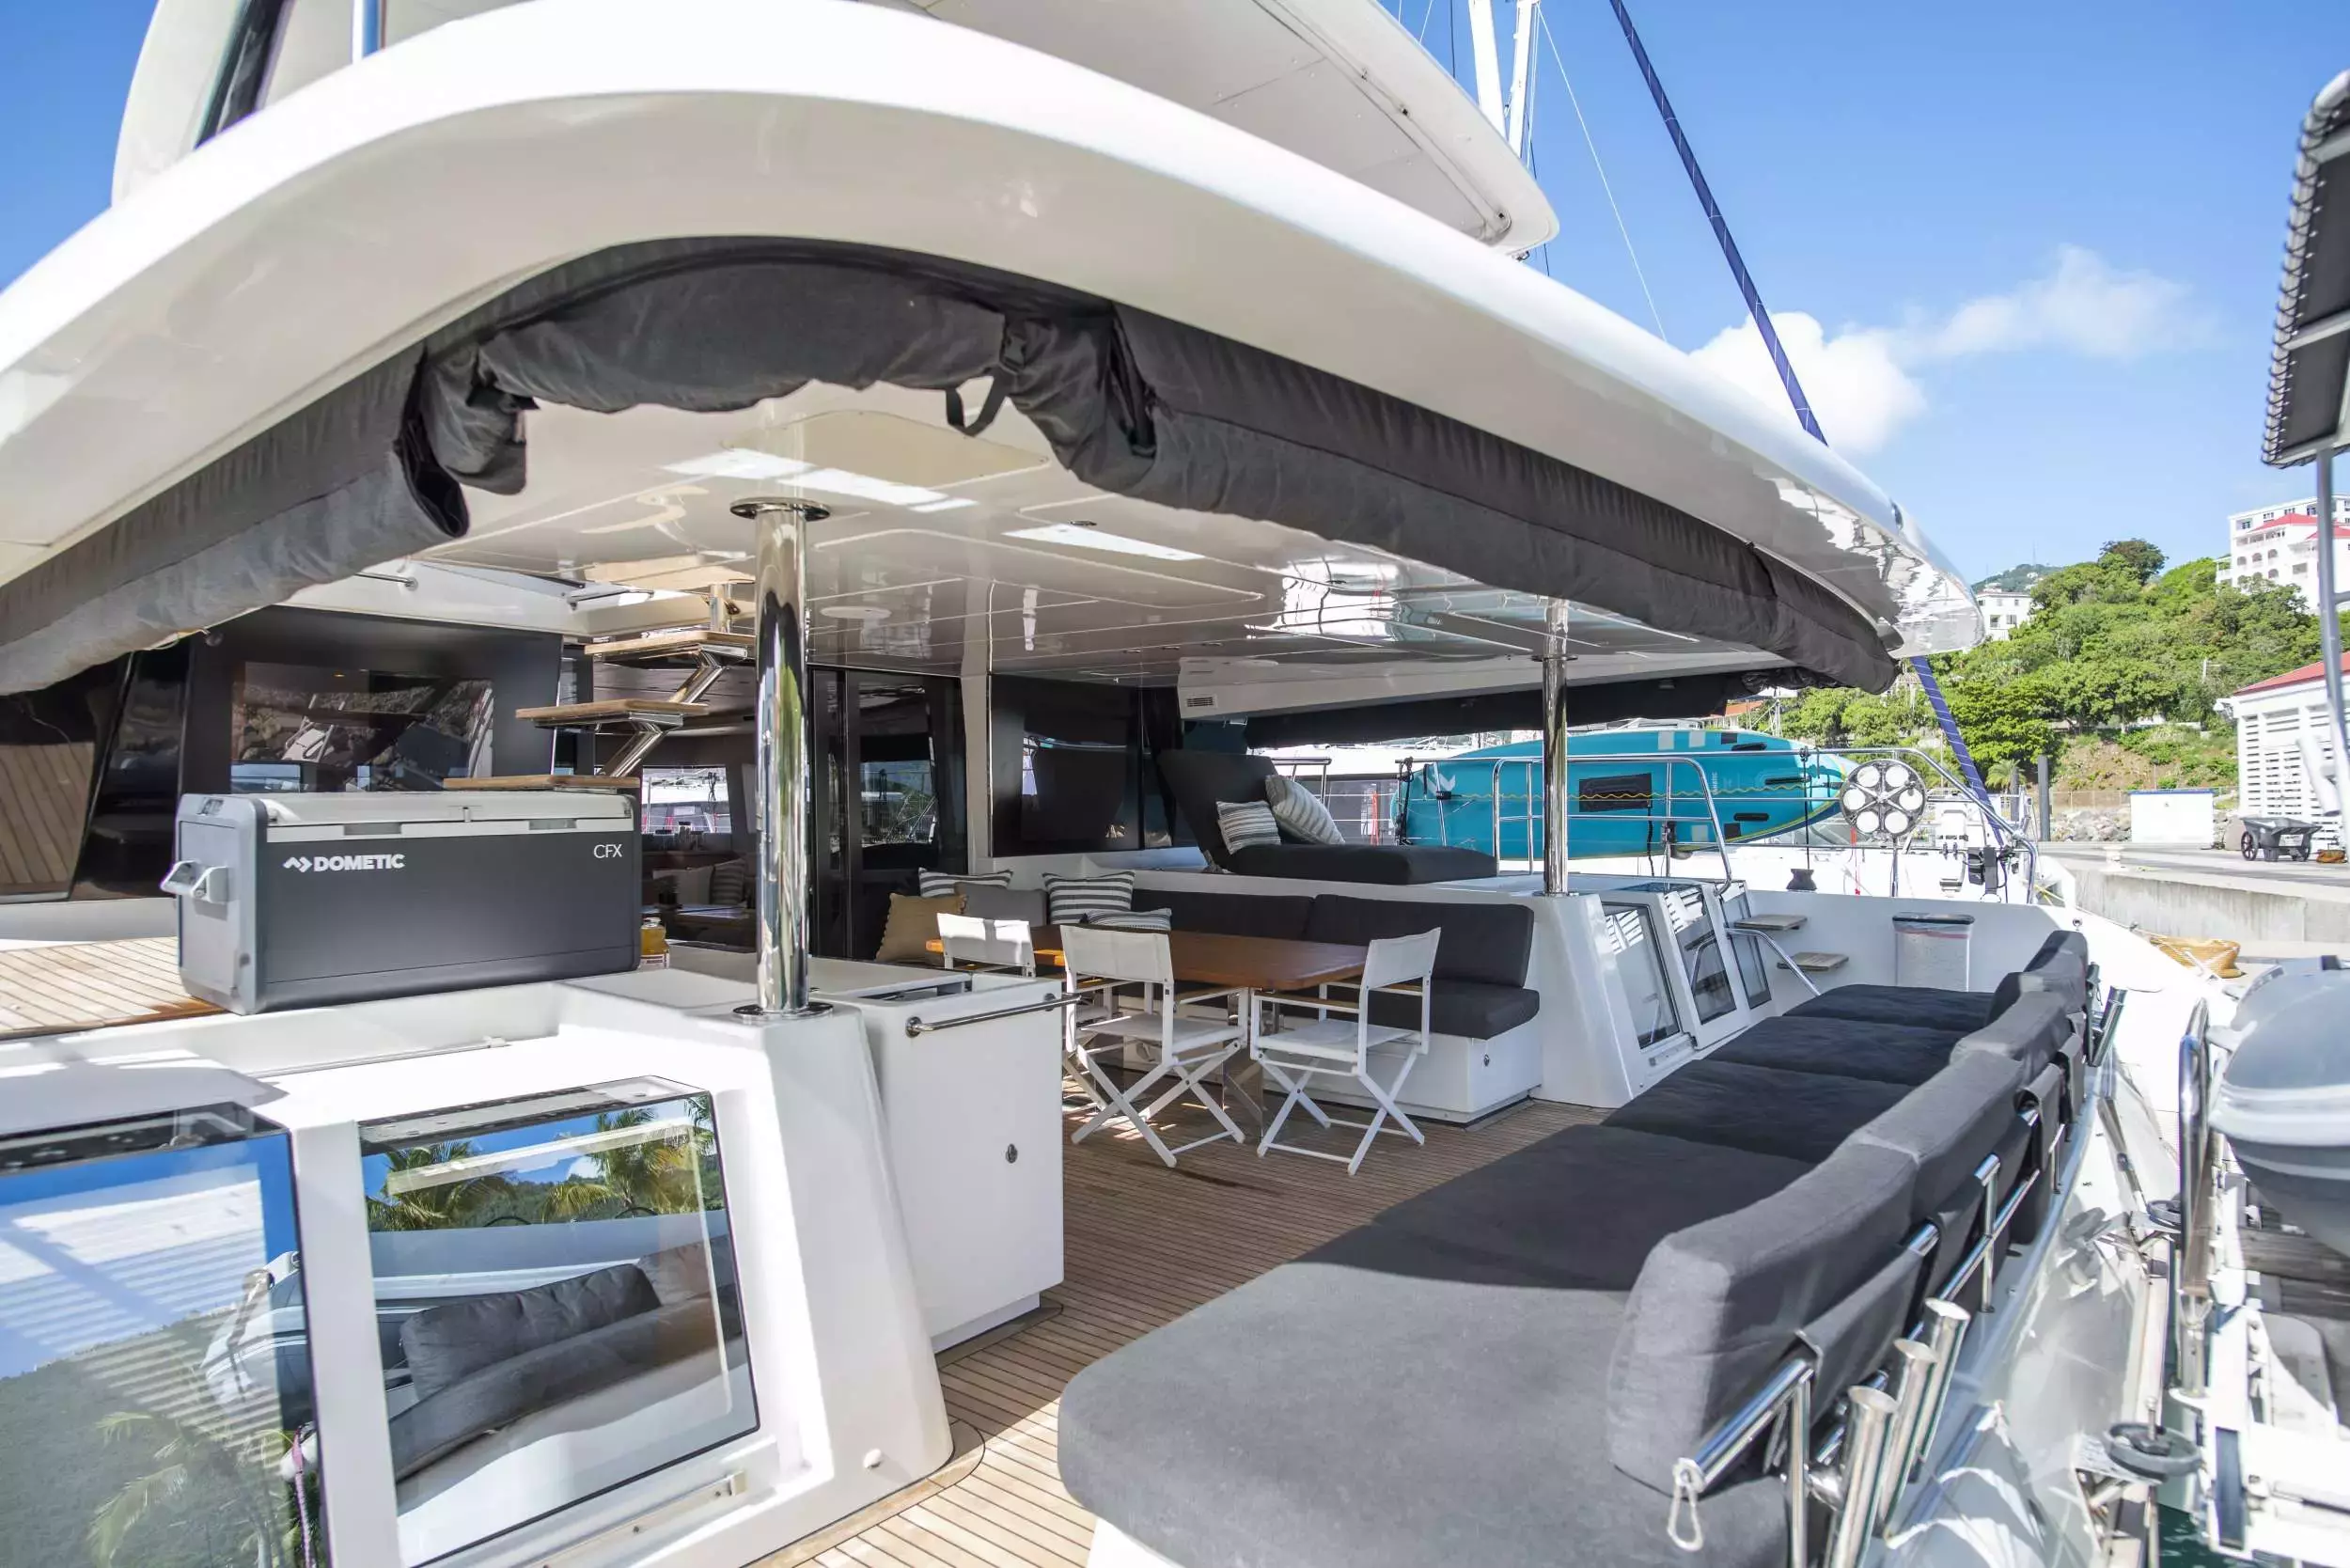 Colette by Lagoon - Special Offer for a private Power Catamaran Charter in Virgin Gorda with a crew